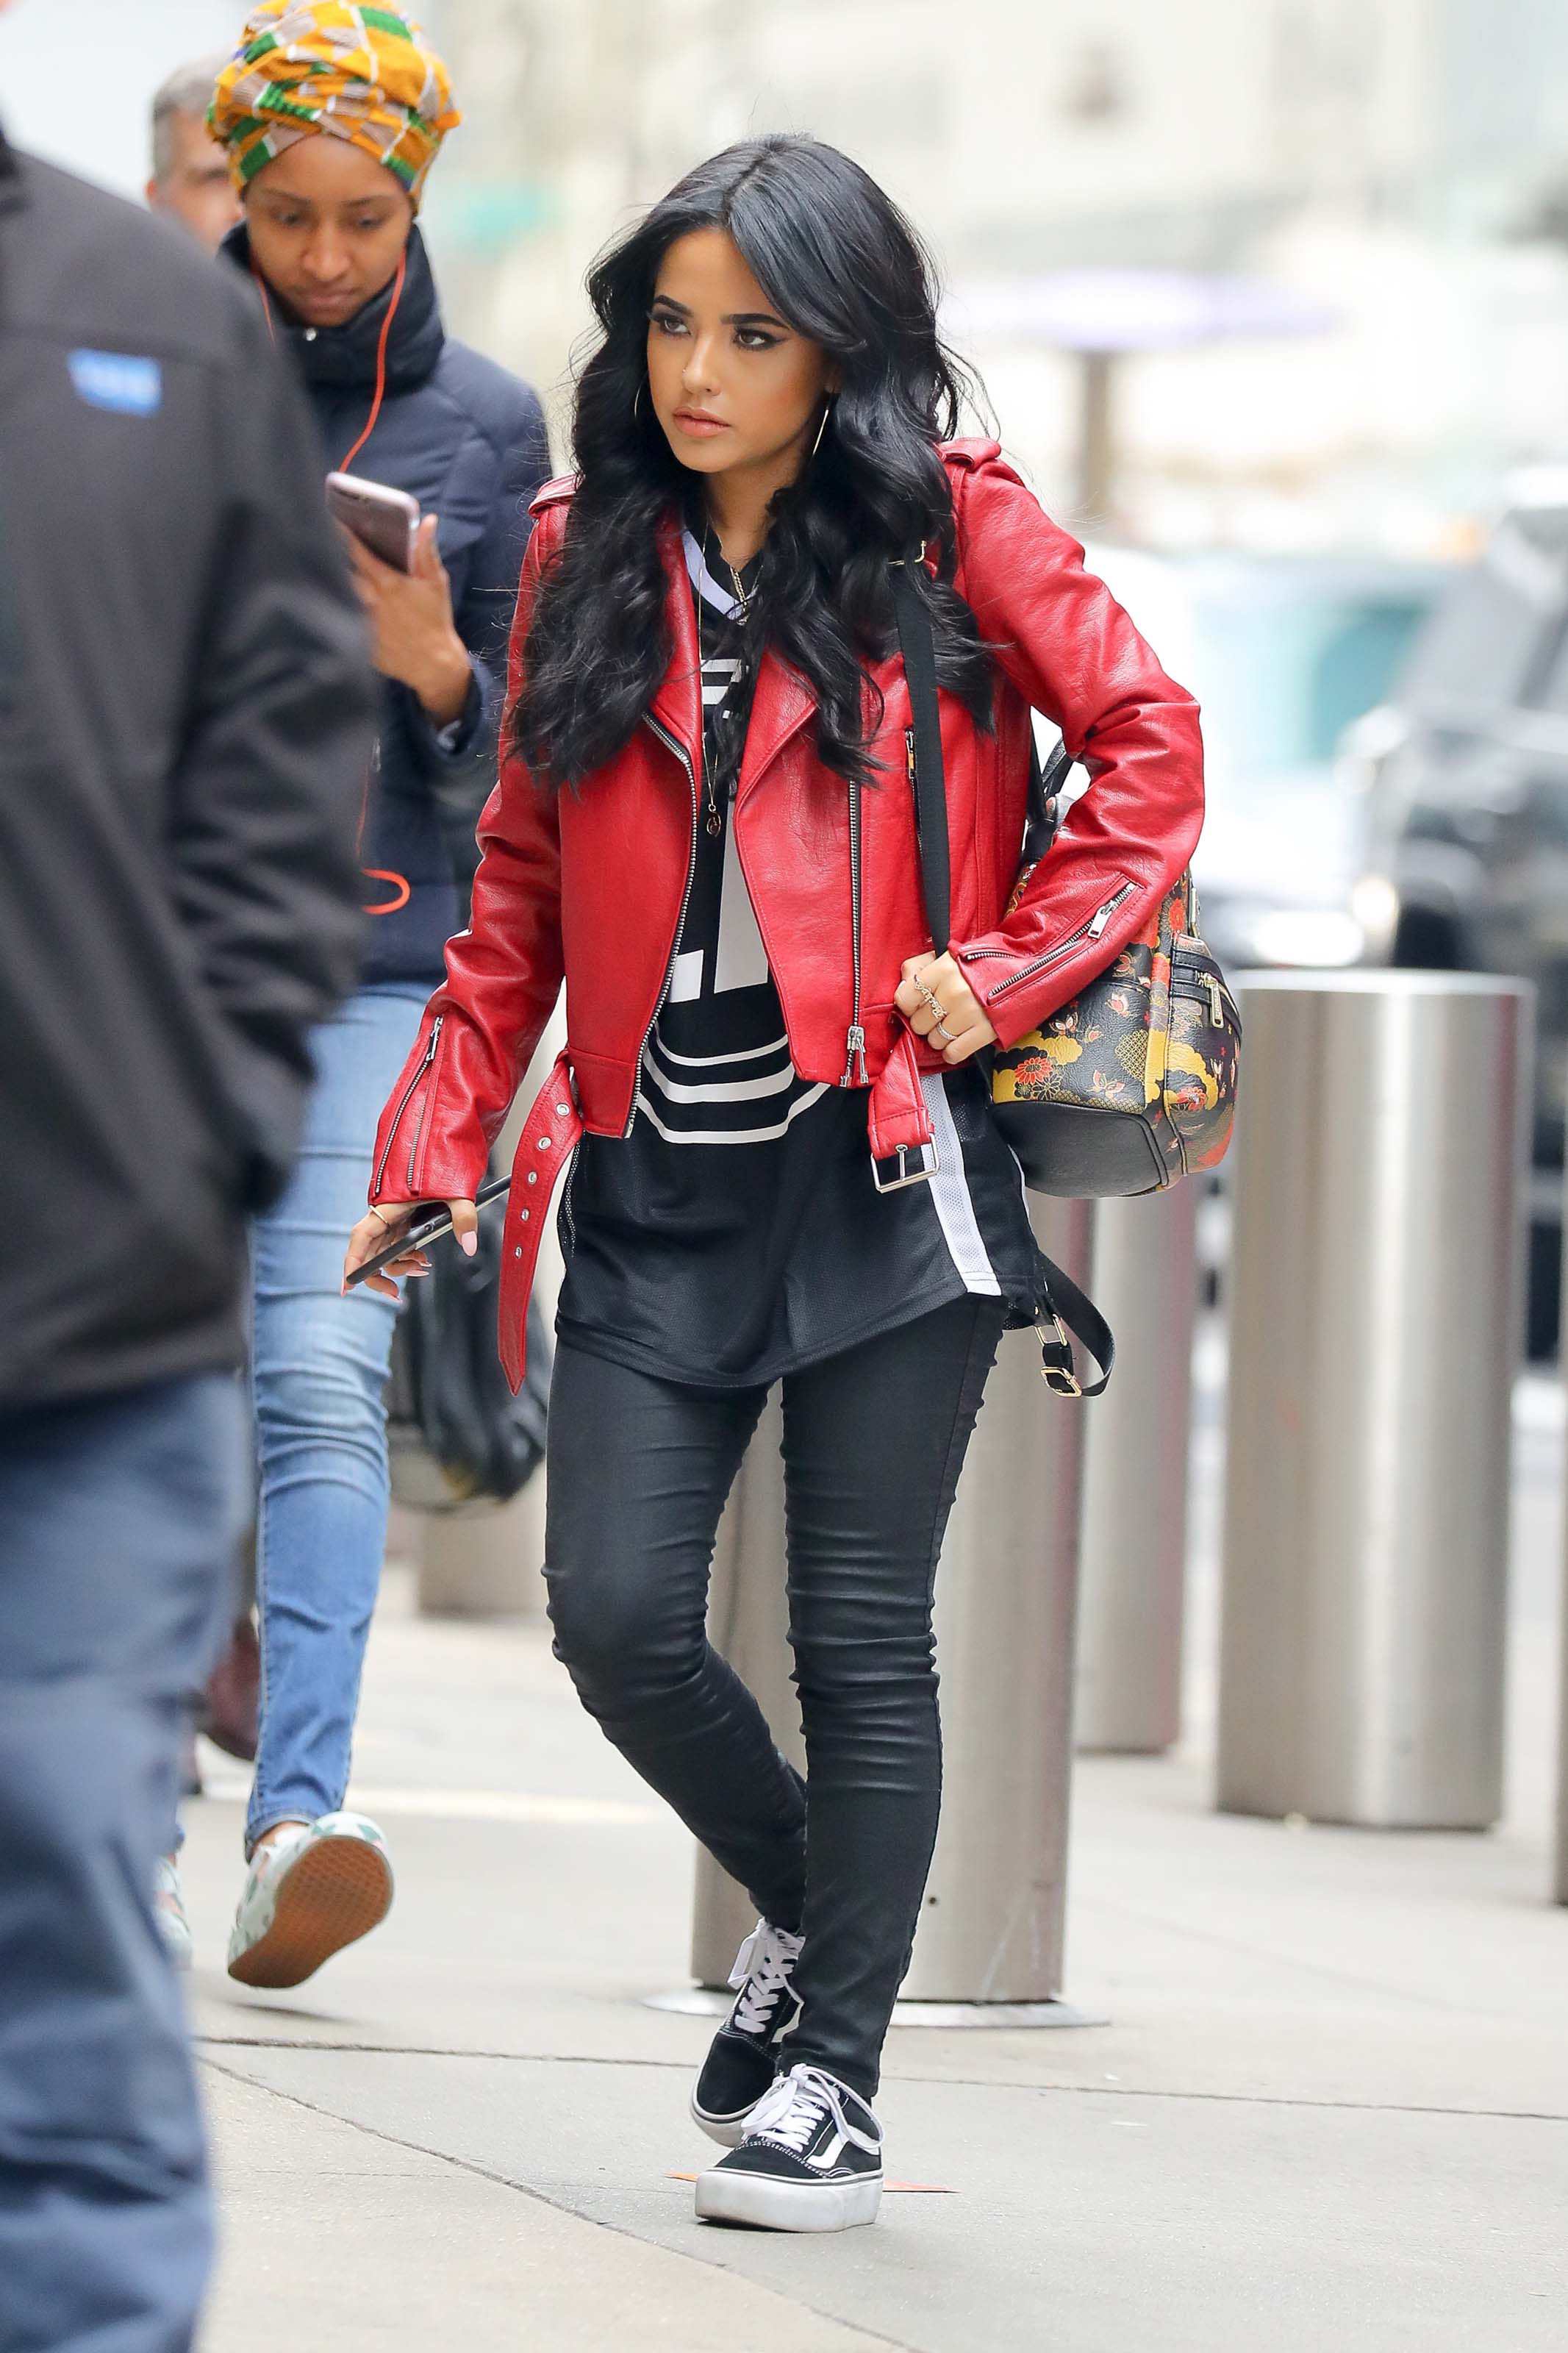 Becky G out and about in a cold day in NYC